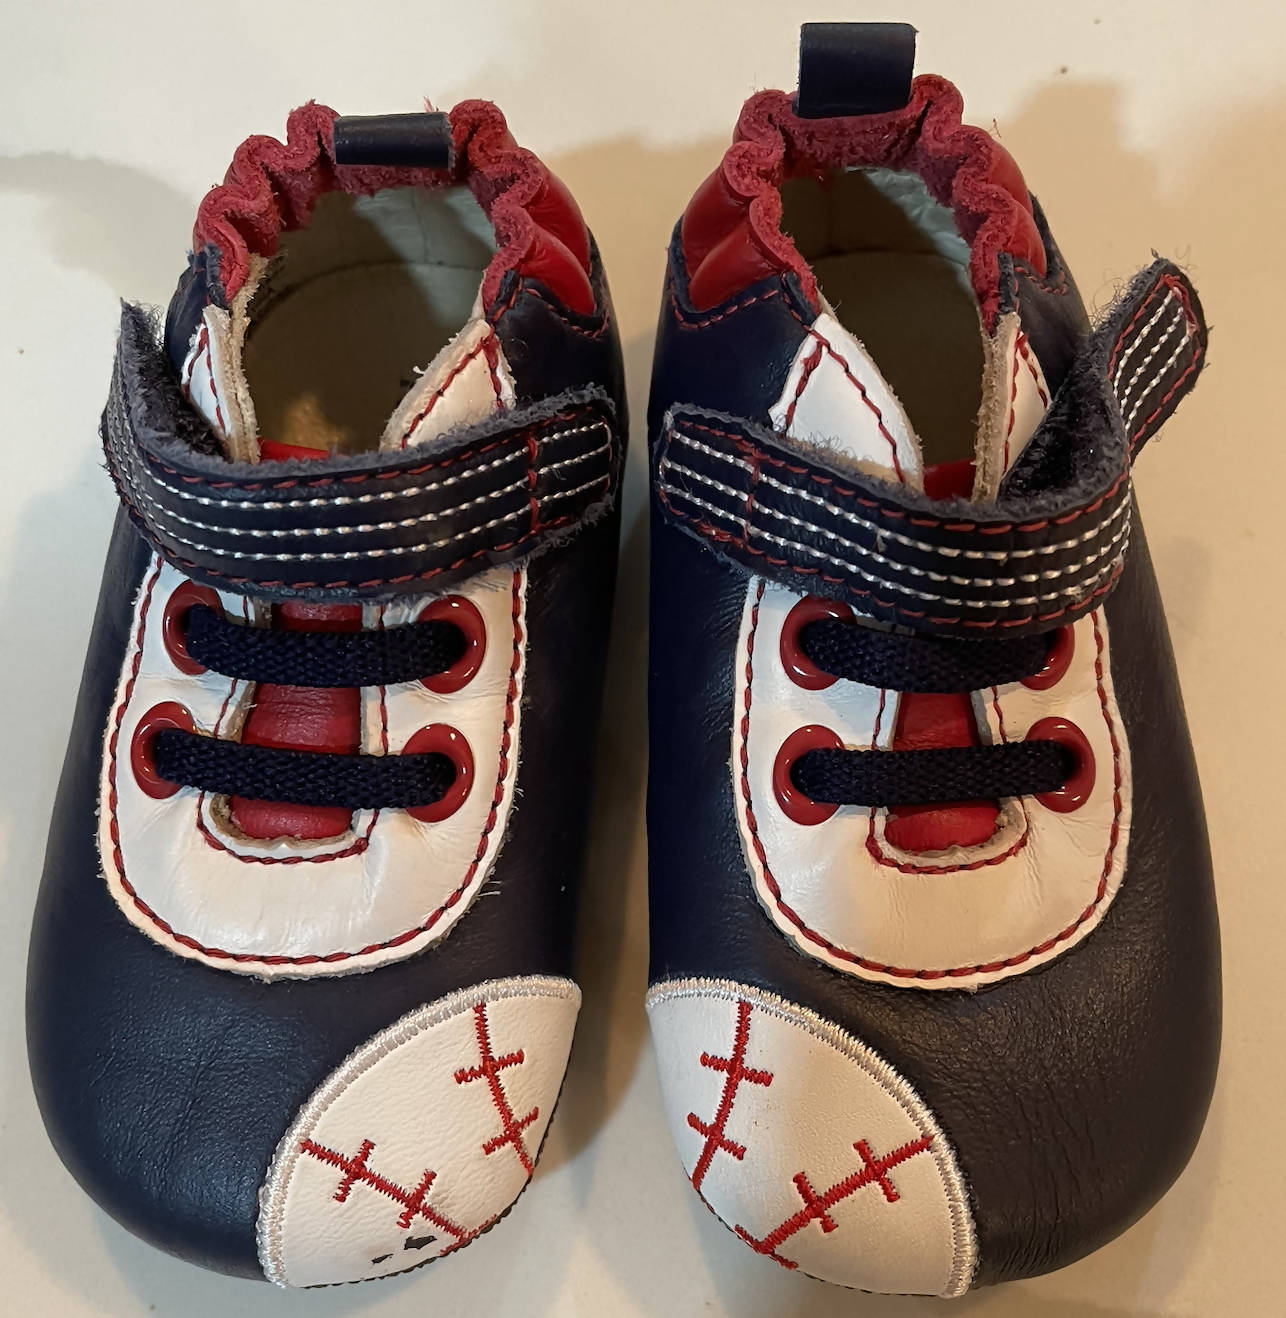 Baby Baseball shoes by Robeez